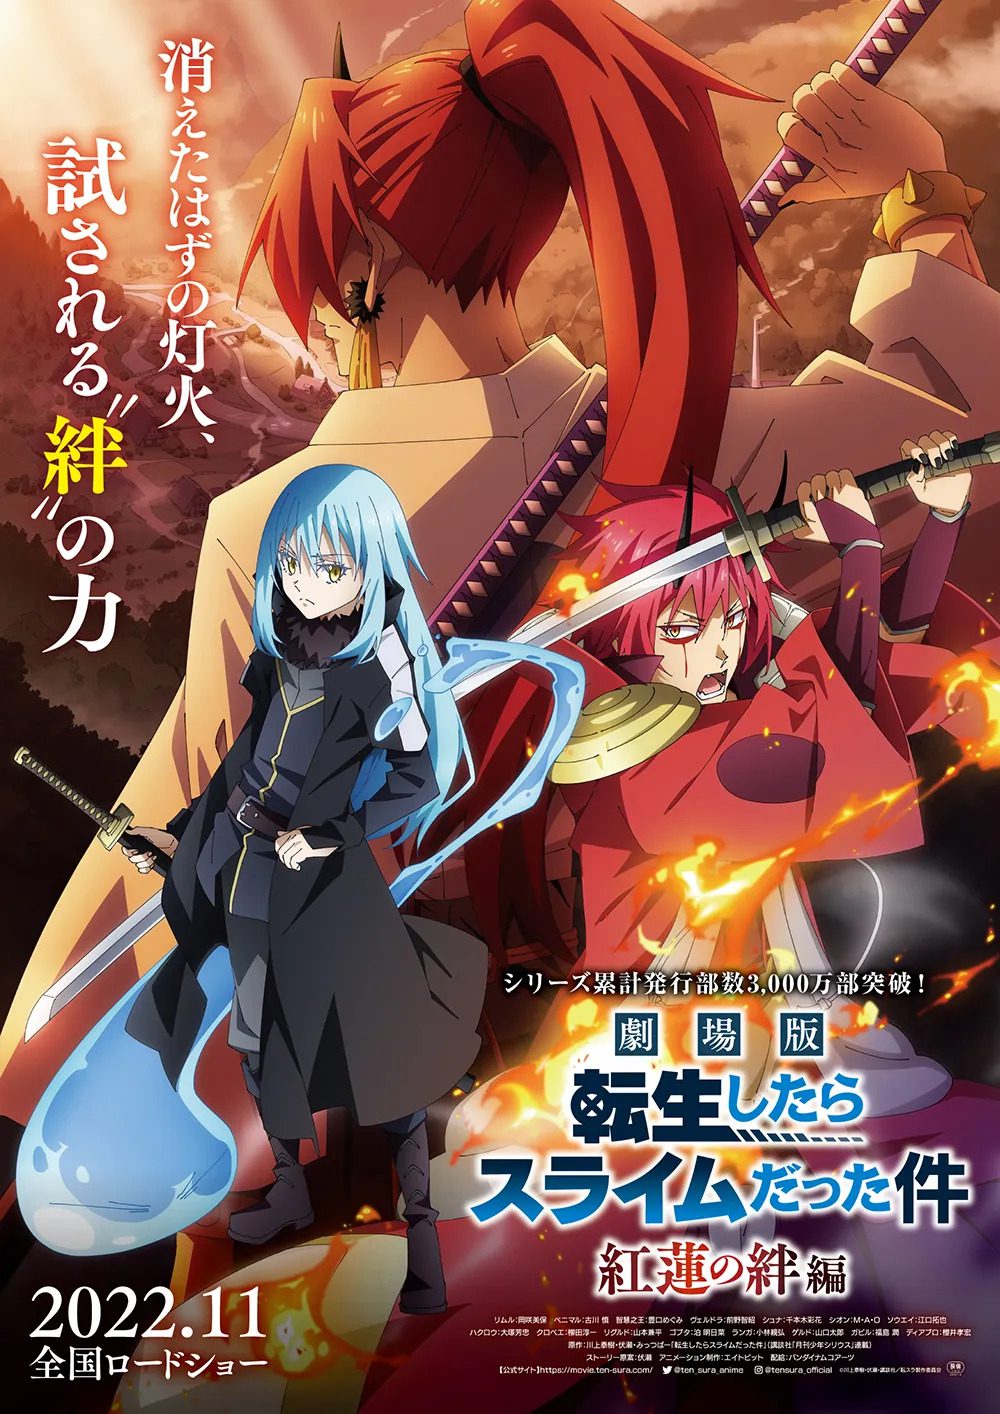 Perfect Watch Guide For Tensura: That Time I Got Reincarnated As A Slime